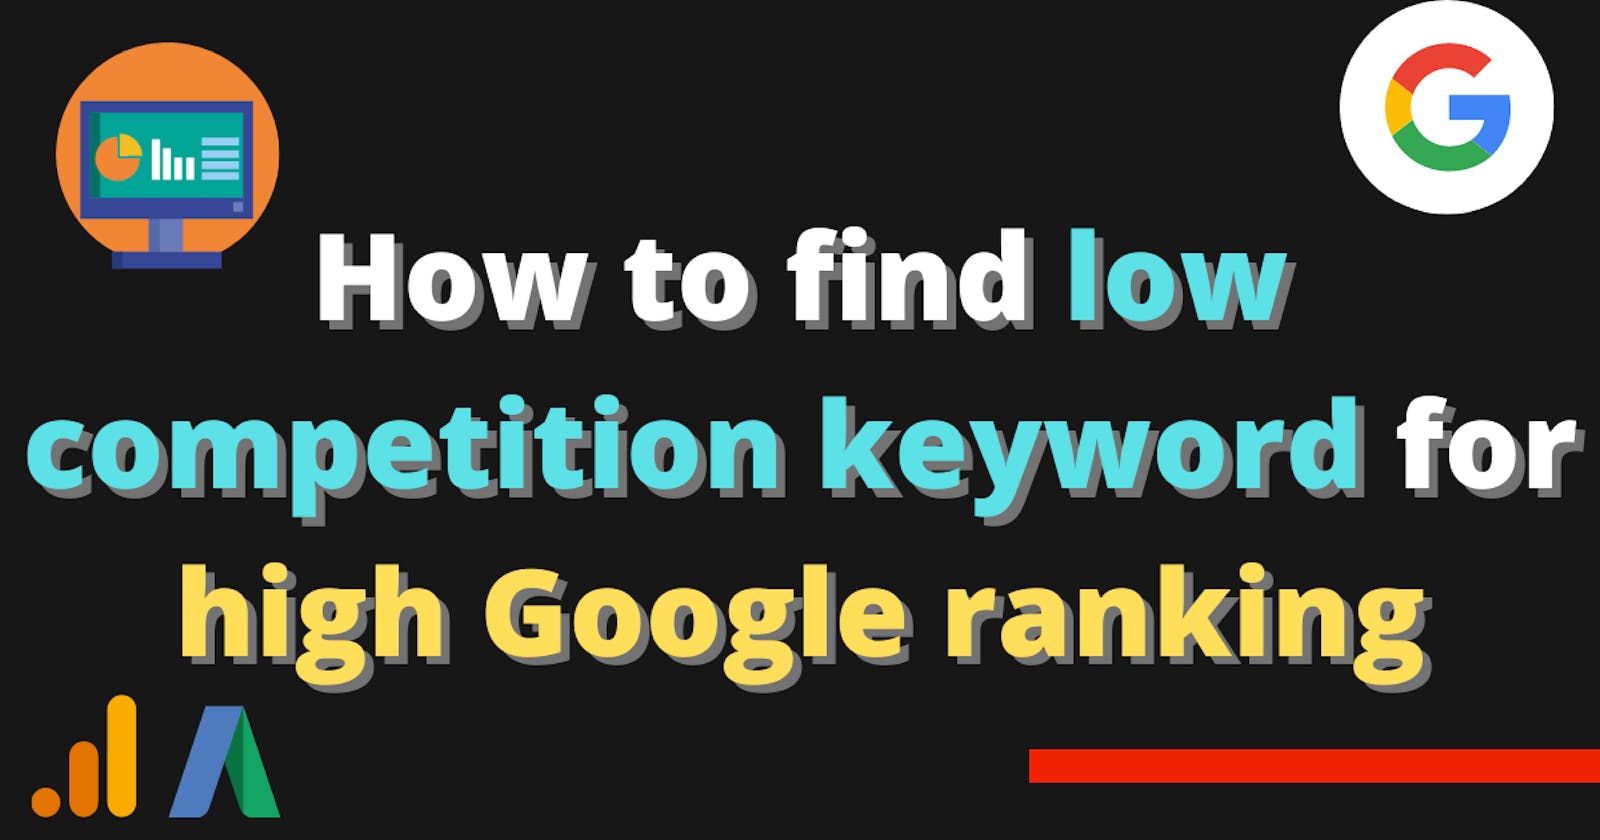 How to find low competition keyword for high google ranking : Get traffic to your blog